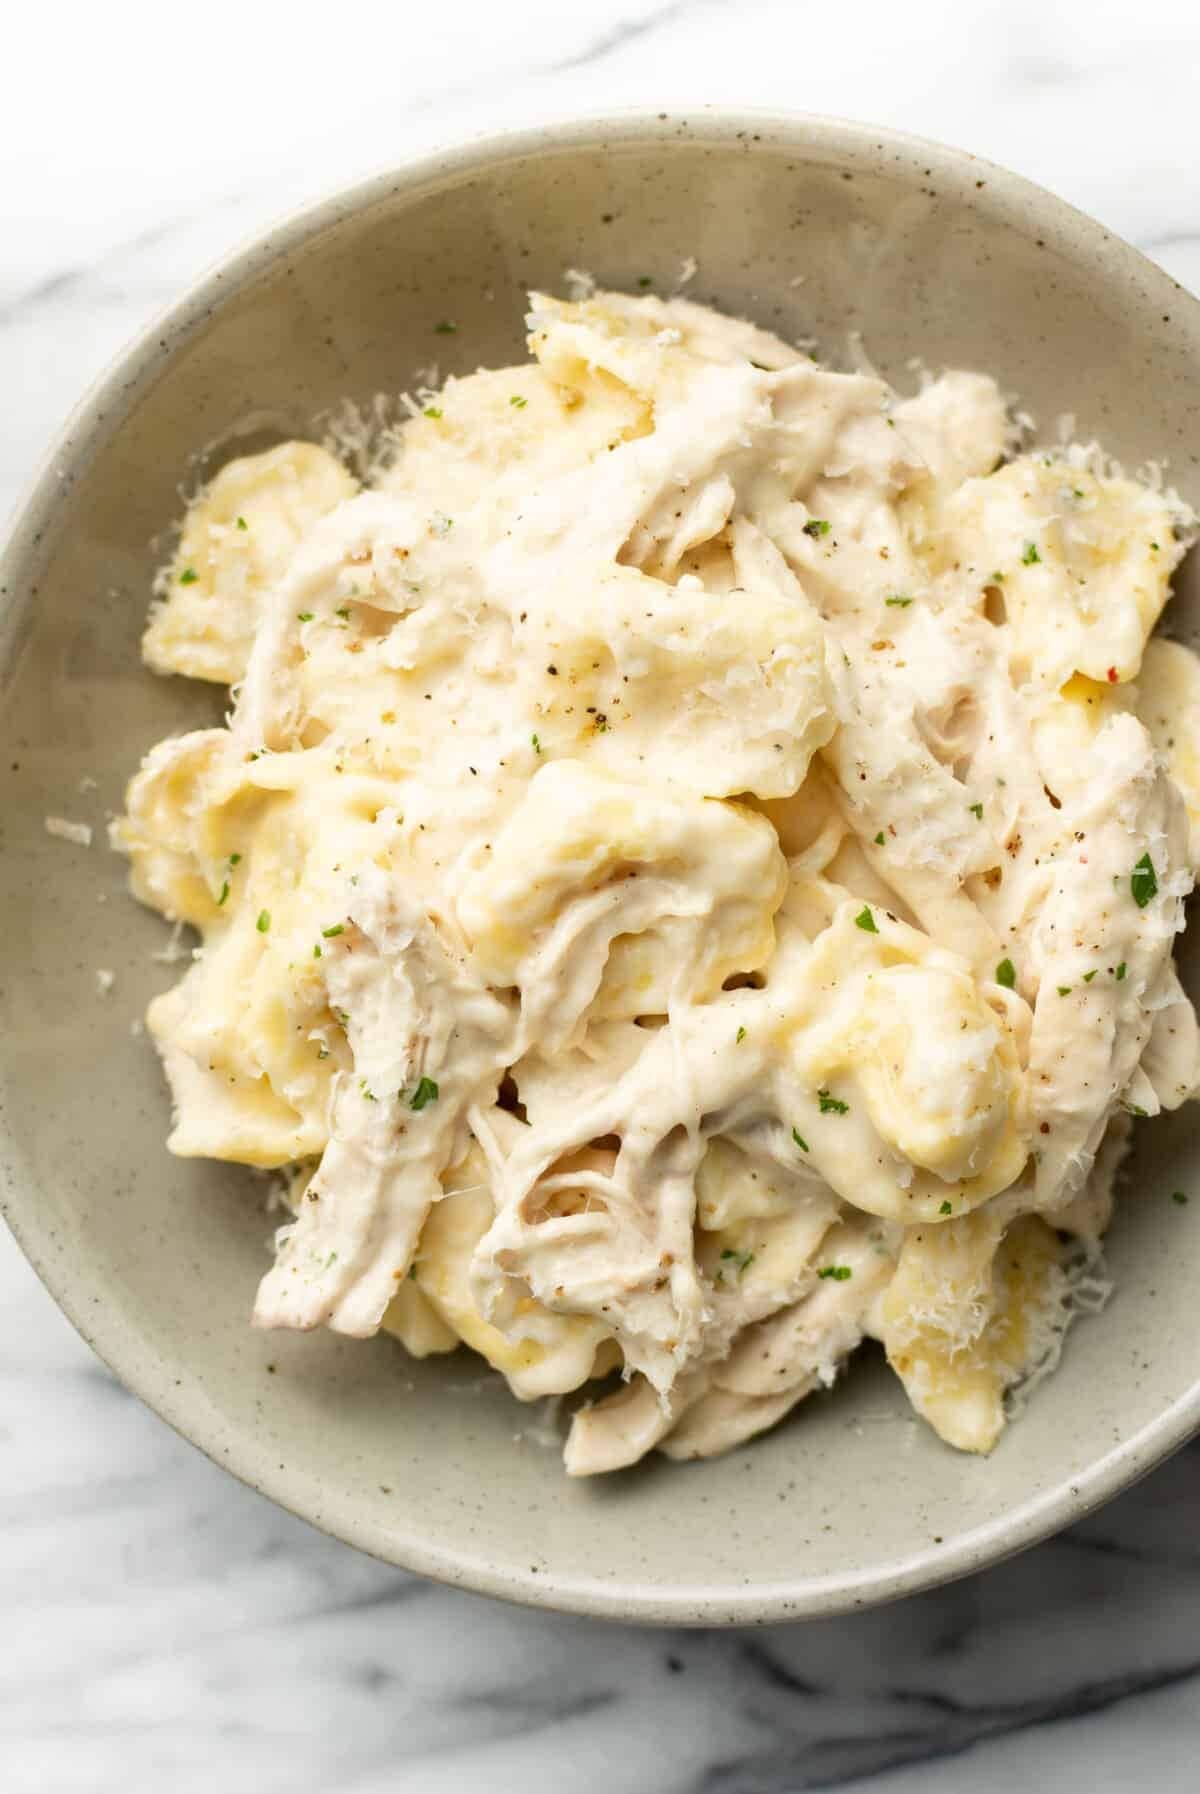 Creamy tortellini pasta with sauce and shredded chicken.